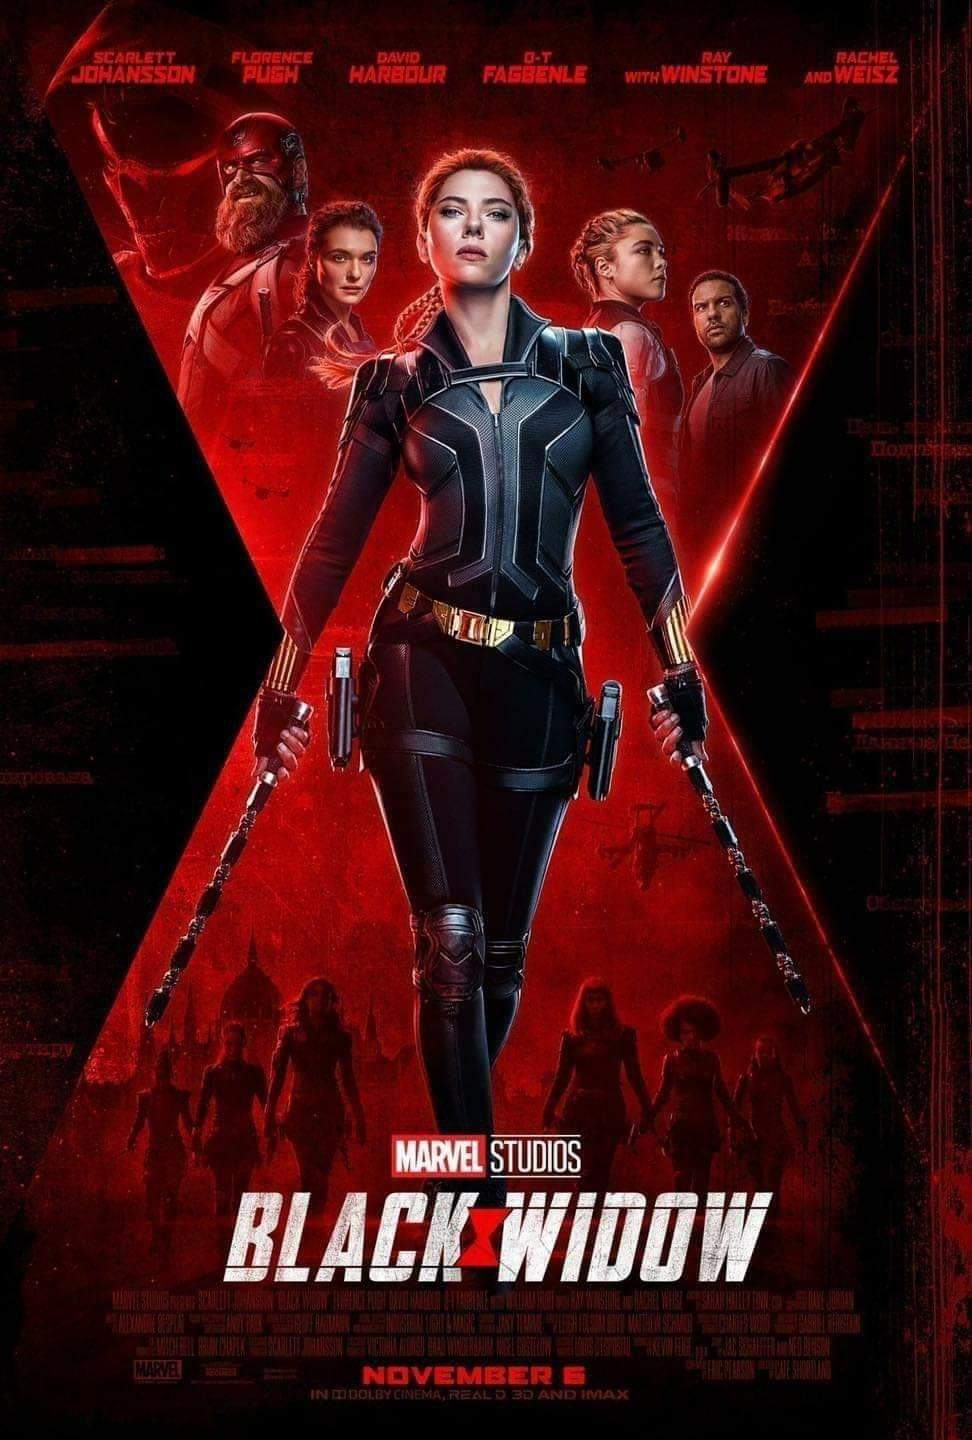 anticipated movies 2021 - black widow poster november - Scarlett Johansson Florence Pugh David Harbour 3T Fagbenle Ray With Winstone Rachel And Weisz Marvel Studios Black Widow Marvel November E Inddolby Cinema Reals 30 And Viax